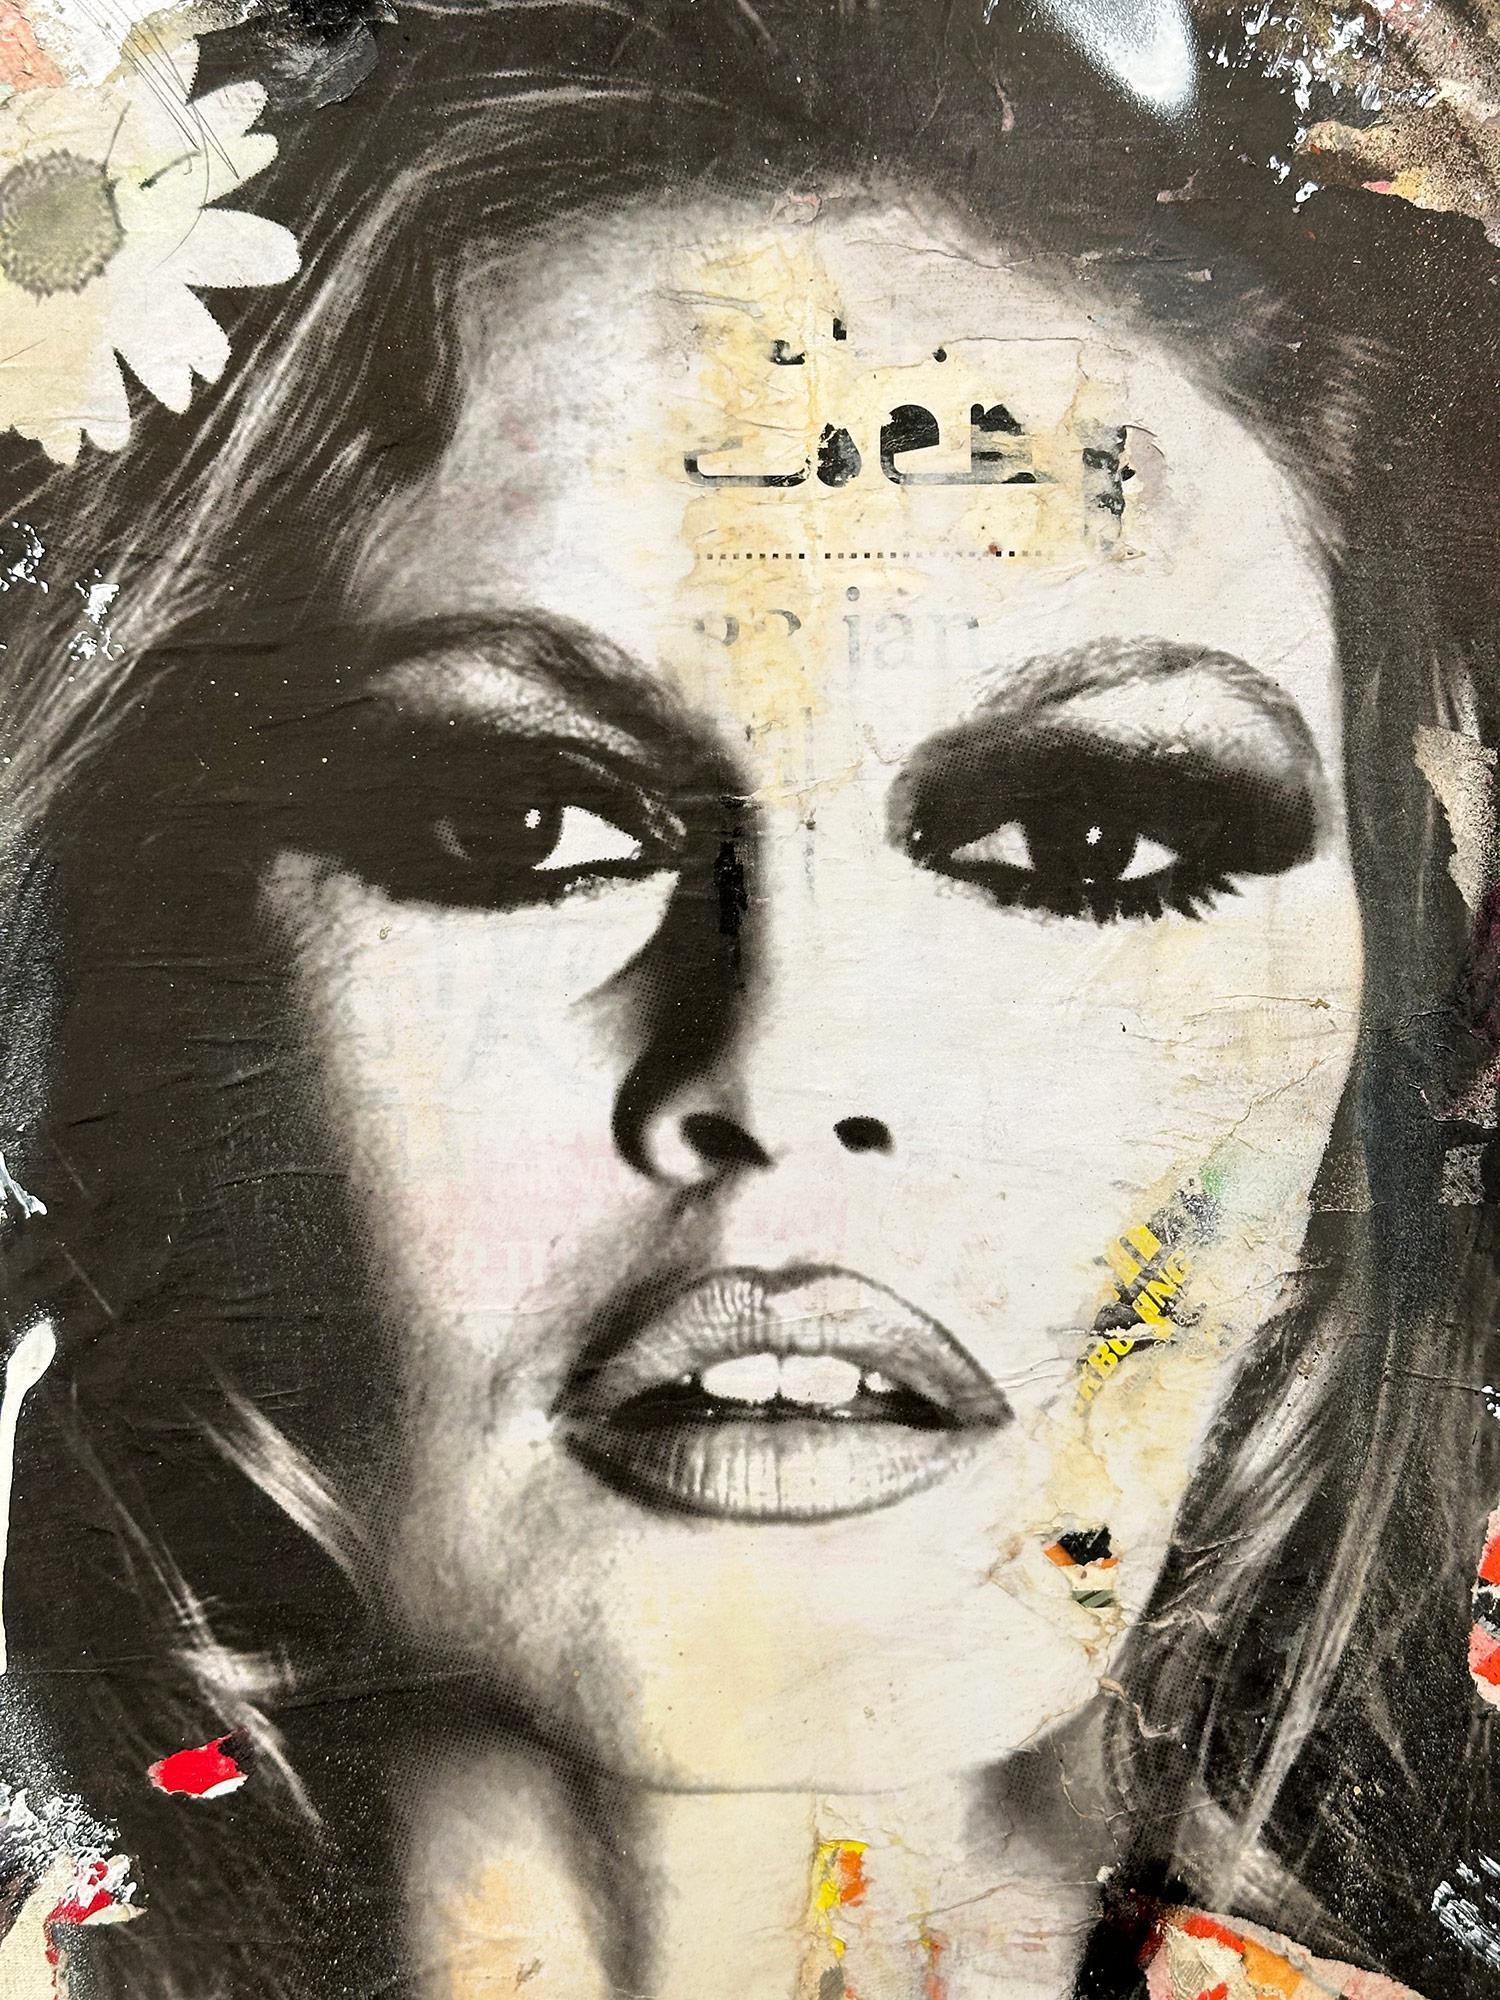 This piece depicts the famous French actress and model Brigitte Bardot. Done with beautiful expressive colors and a distinctive street art design, this piece pops with energy and romantic beauty. Its composition and bold collage make a wonderful